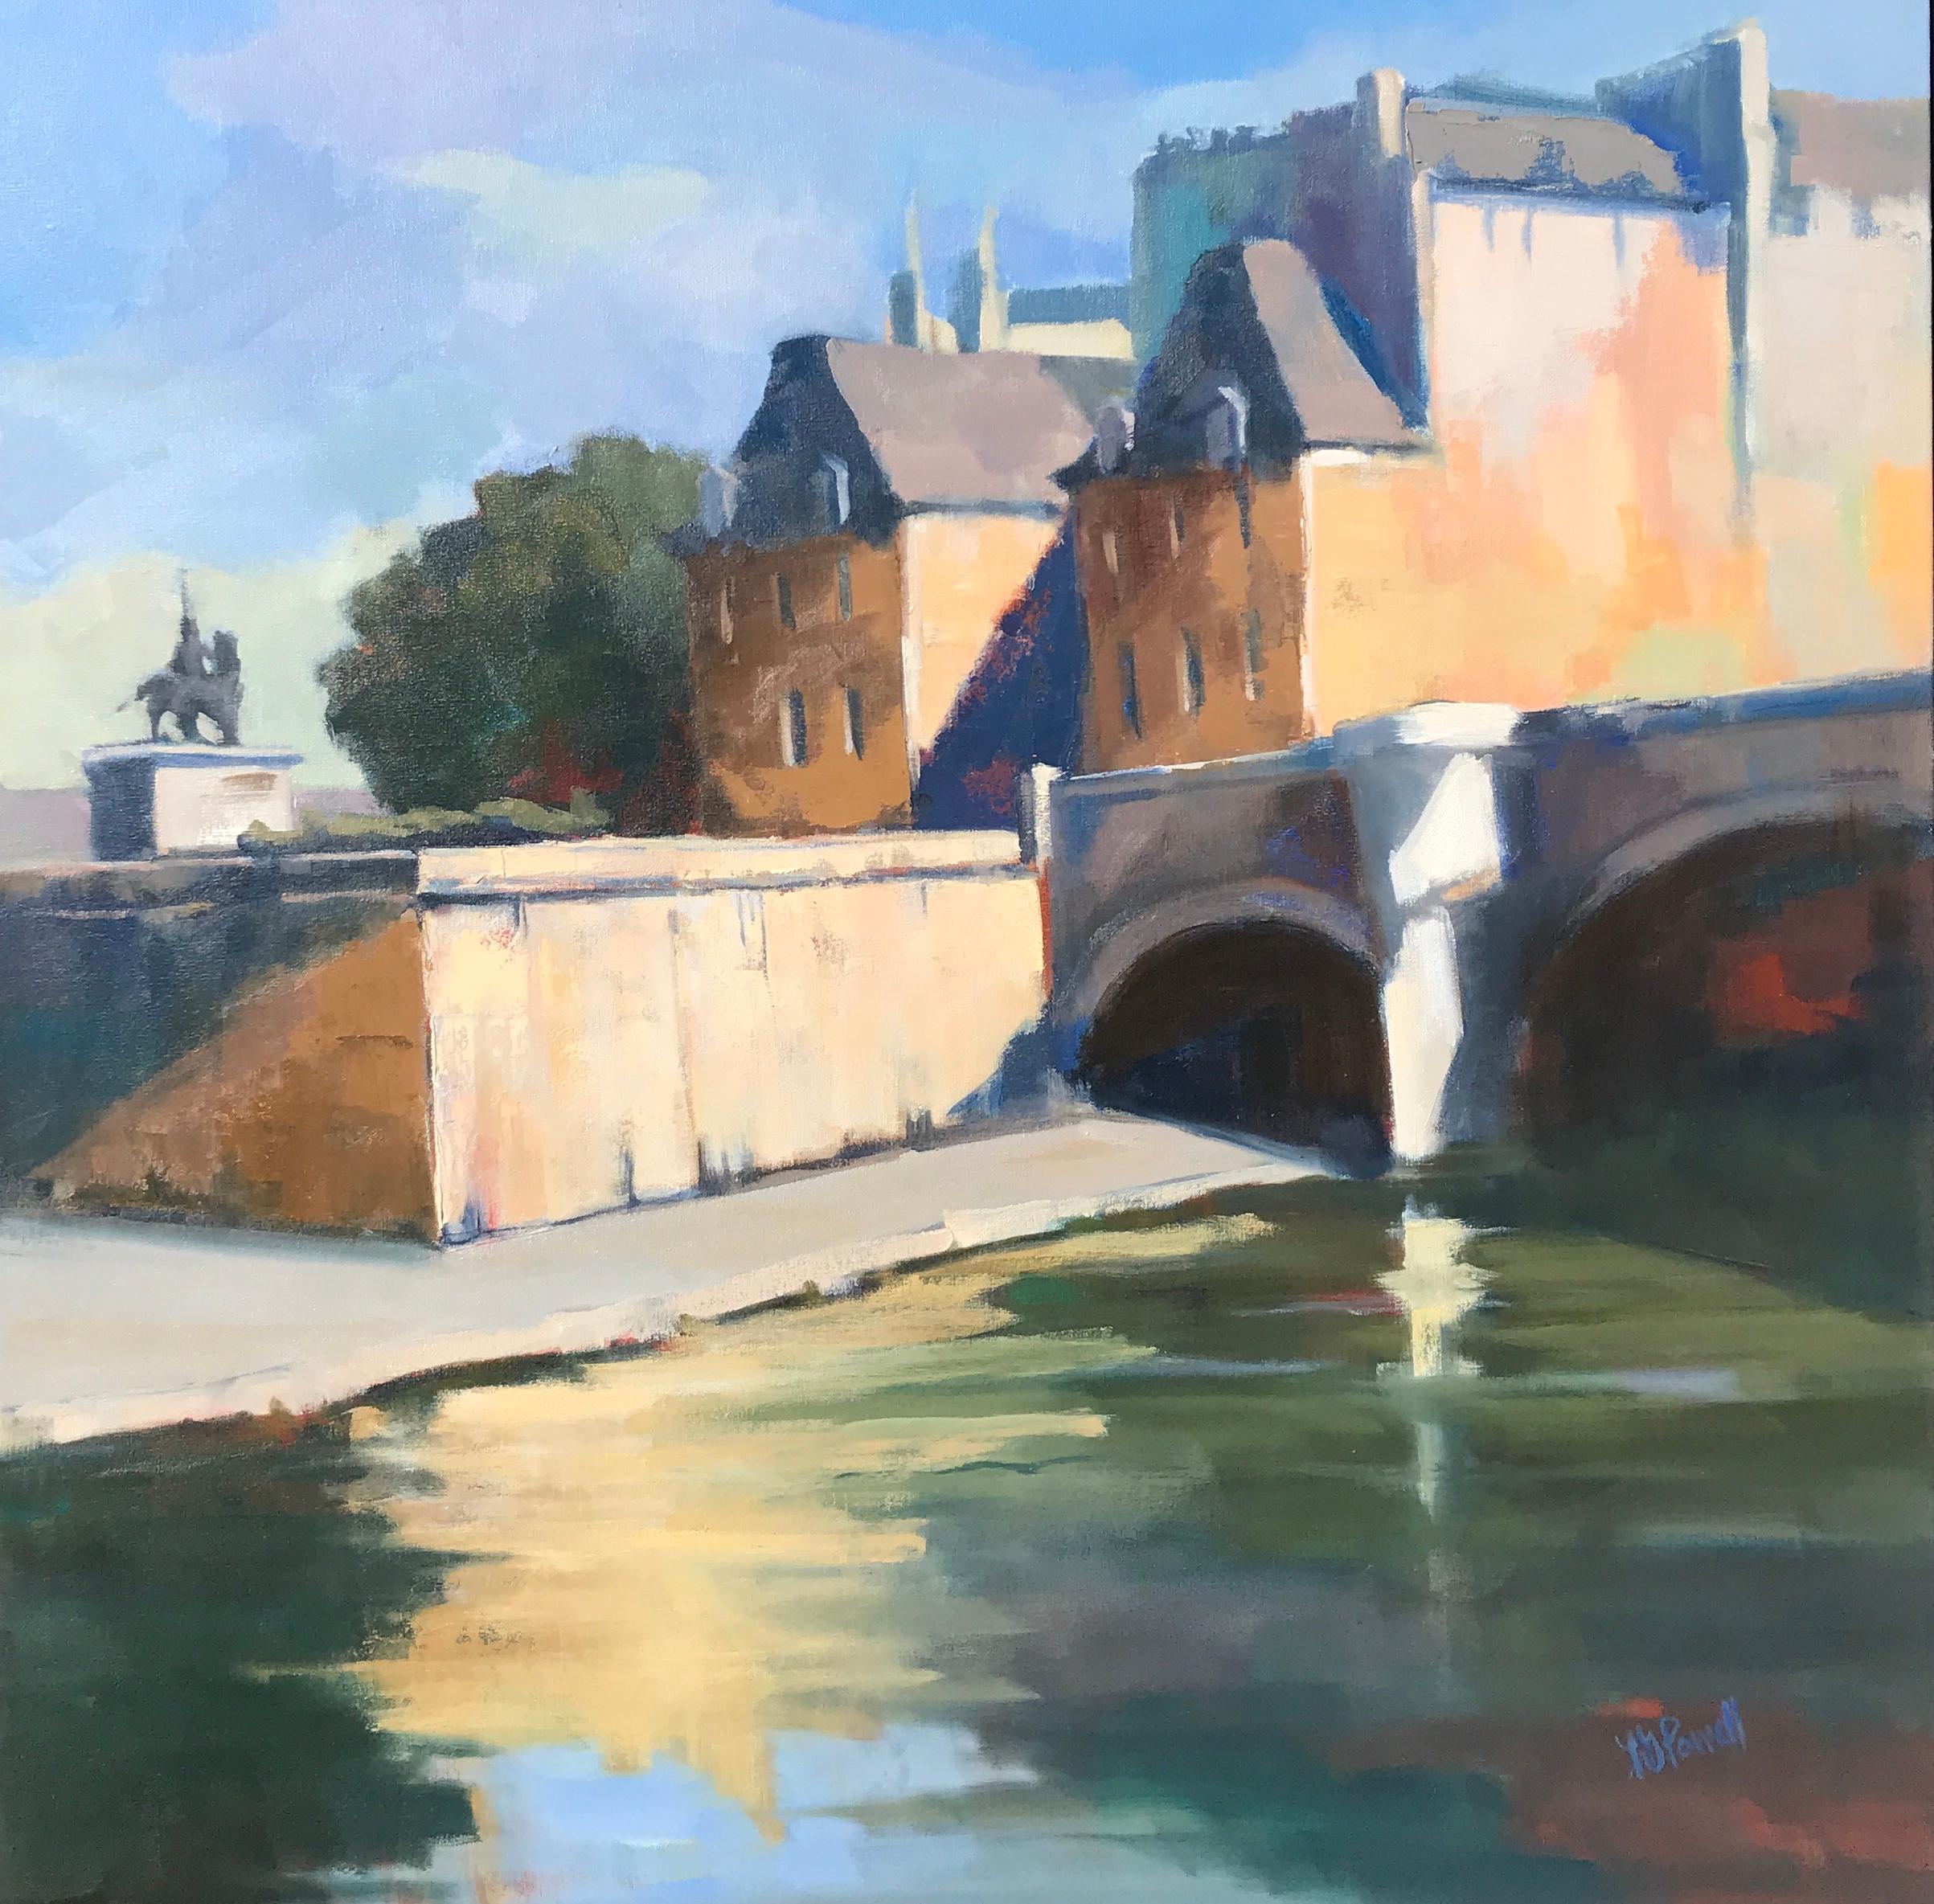 'Pont Neuf and Henri IV' is a framed Post-Impressionist oil on canvas painting created by American artist Lesley Powell in 2019. Featuring a palette made of blue, purple, orange and green tones, the painting depicts one of the loveliest bridges of